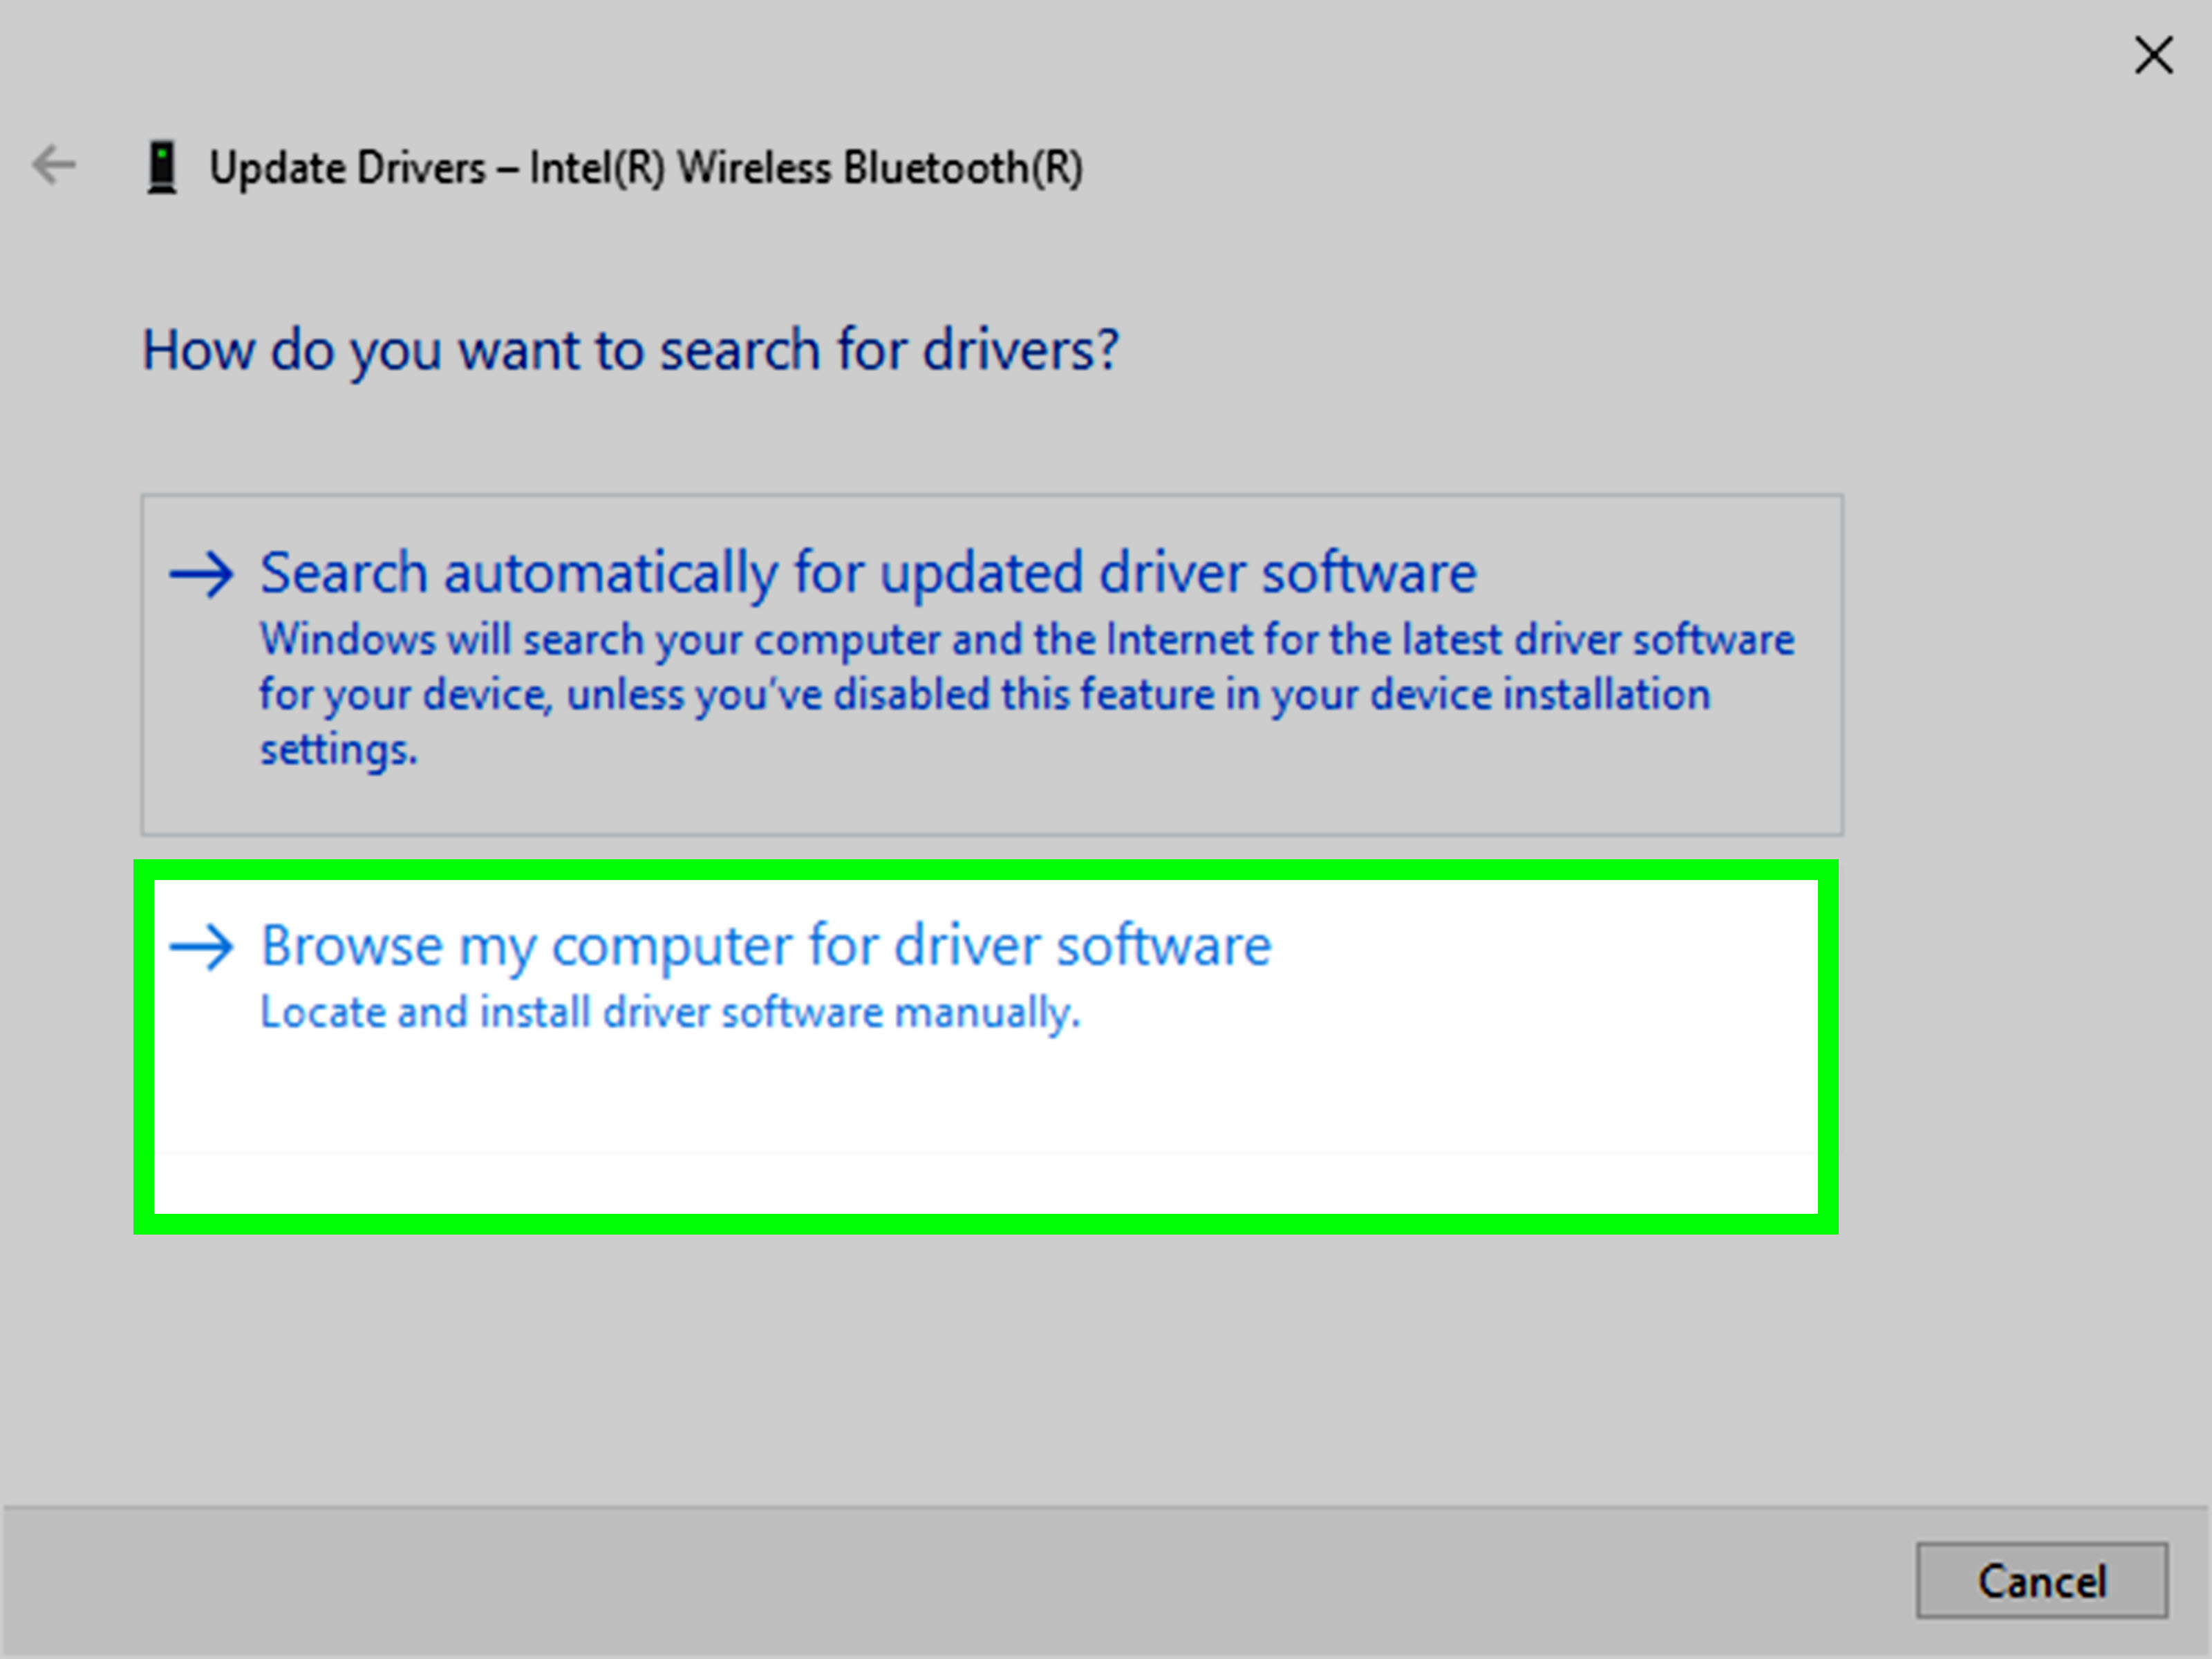 Manufacturer's website: Visit the manufacturer's website of the device with the error, search for the latest driver compatible with your Windows version, and download it.
Driver update software: Consider using reputable driver update software that can automatically scan, detect, and update all outdated drivers on your PC.